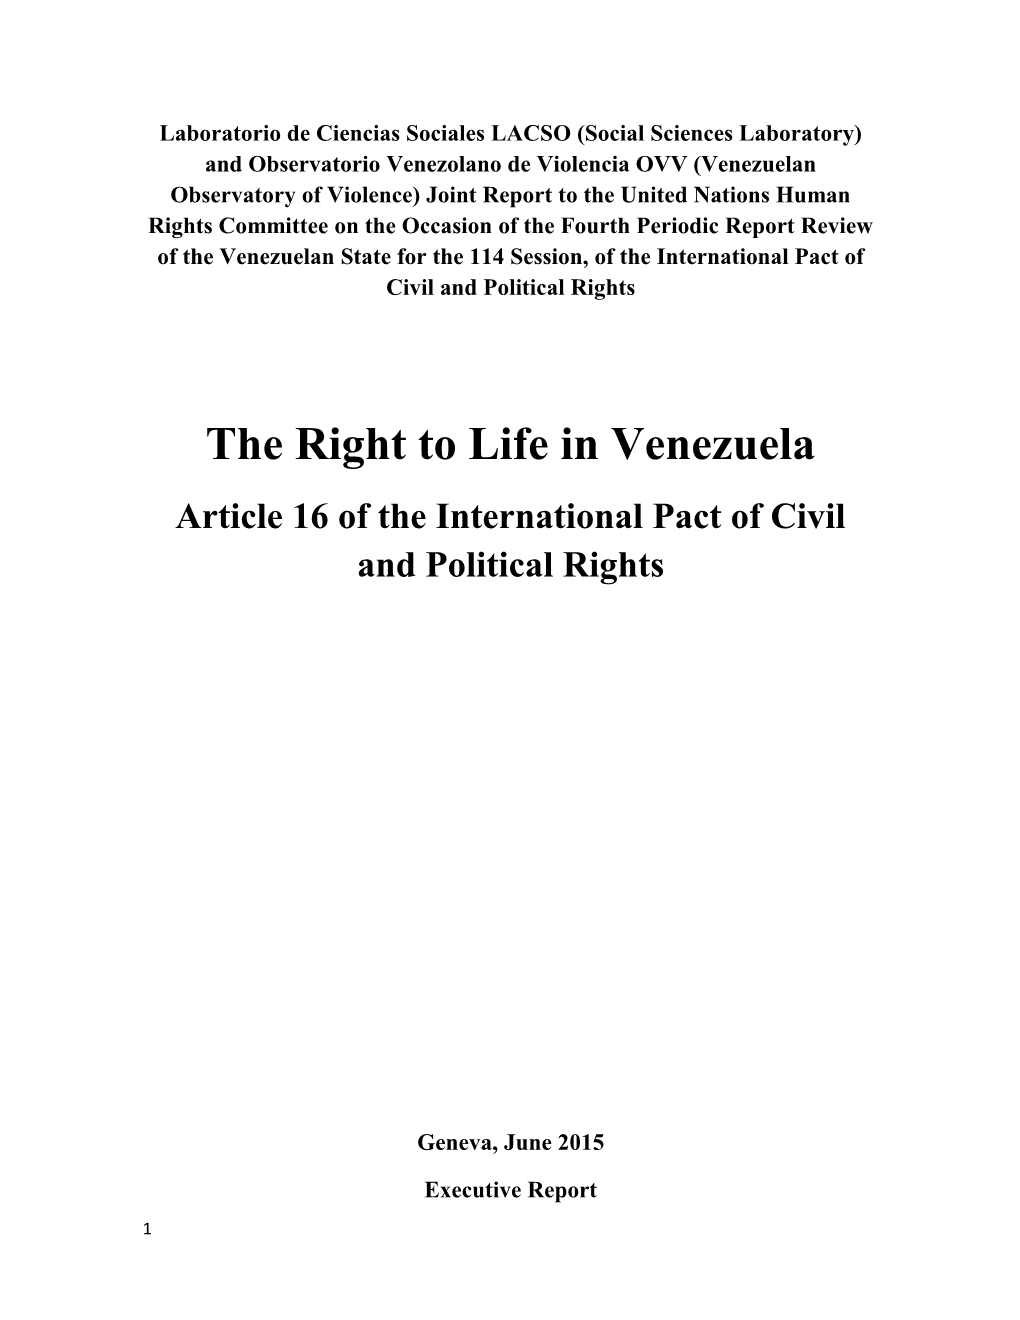 The Right to Life in Venezuela